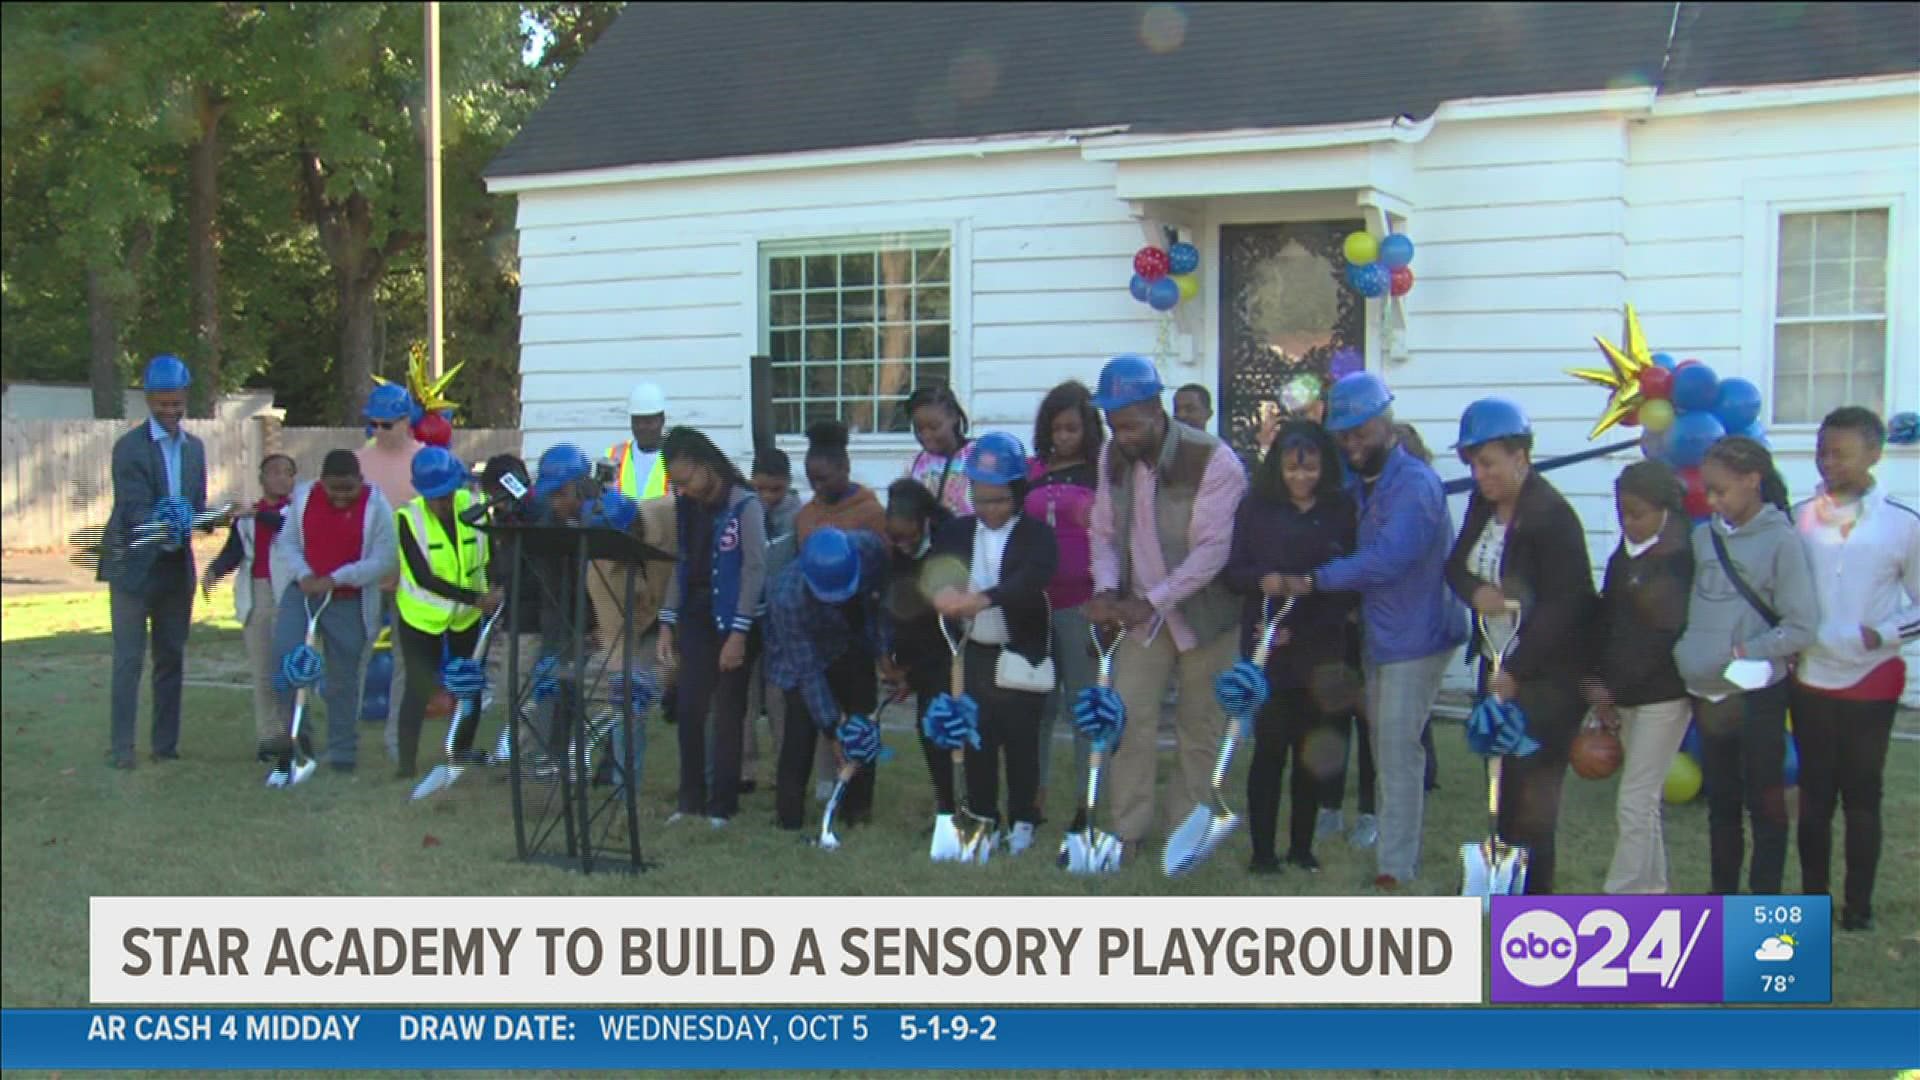 School organizers said the 4,400 sq. ft. sensory based playground will ensure all students have access to a space that fuels positive social interaction.